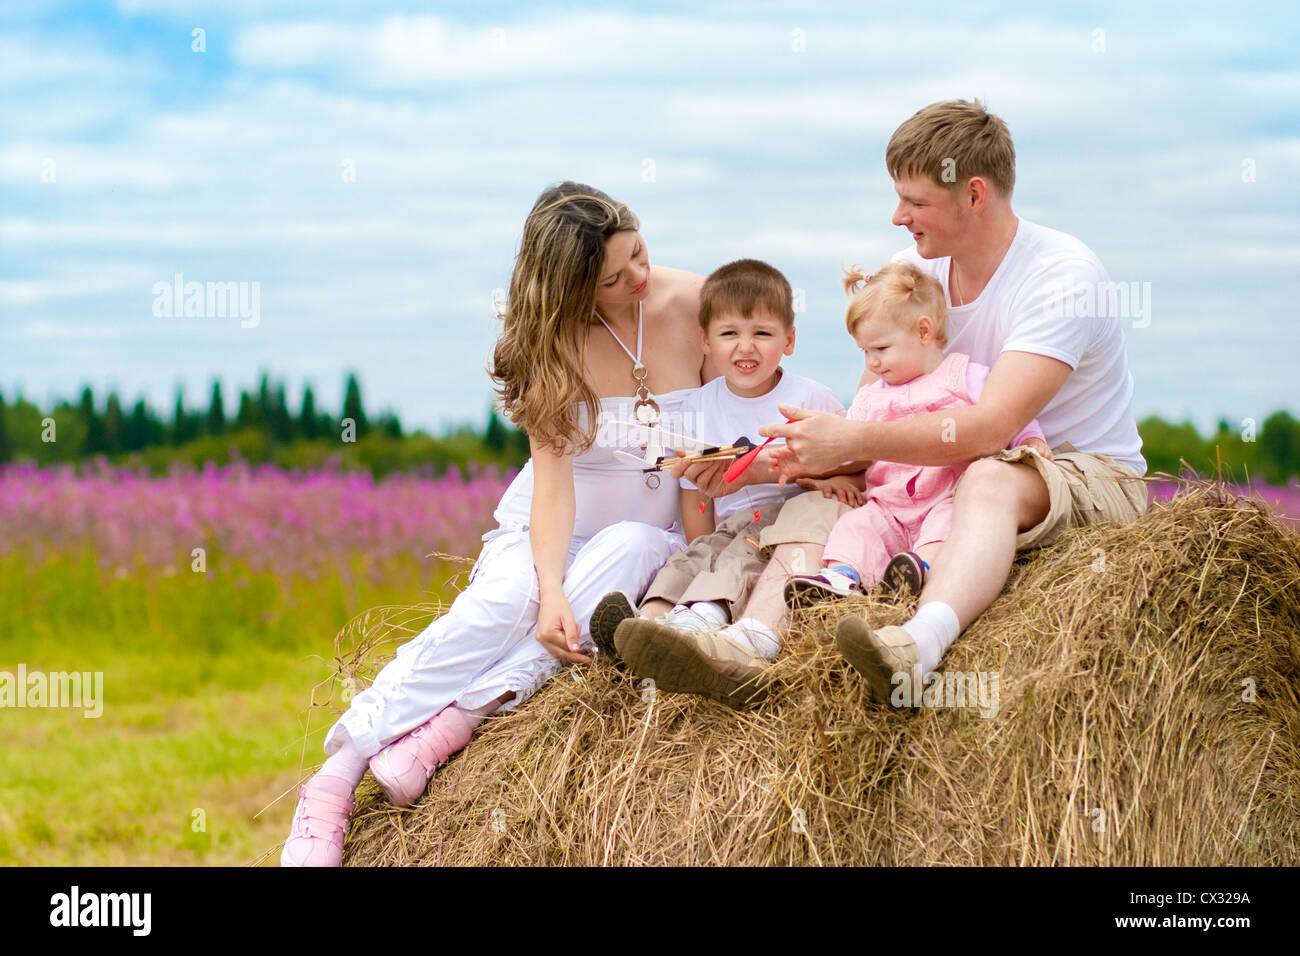 Happy family launching toy aircraft model sitting on haystack together Stock Photo